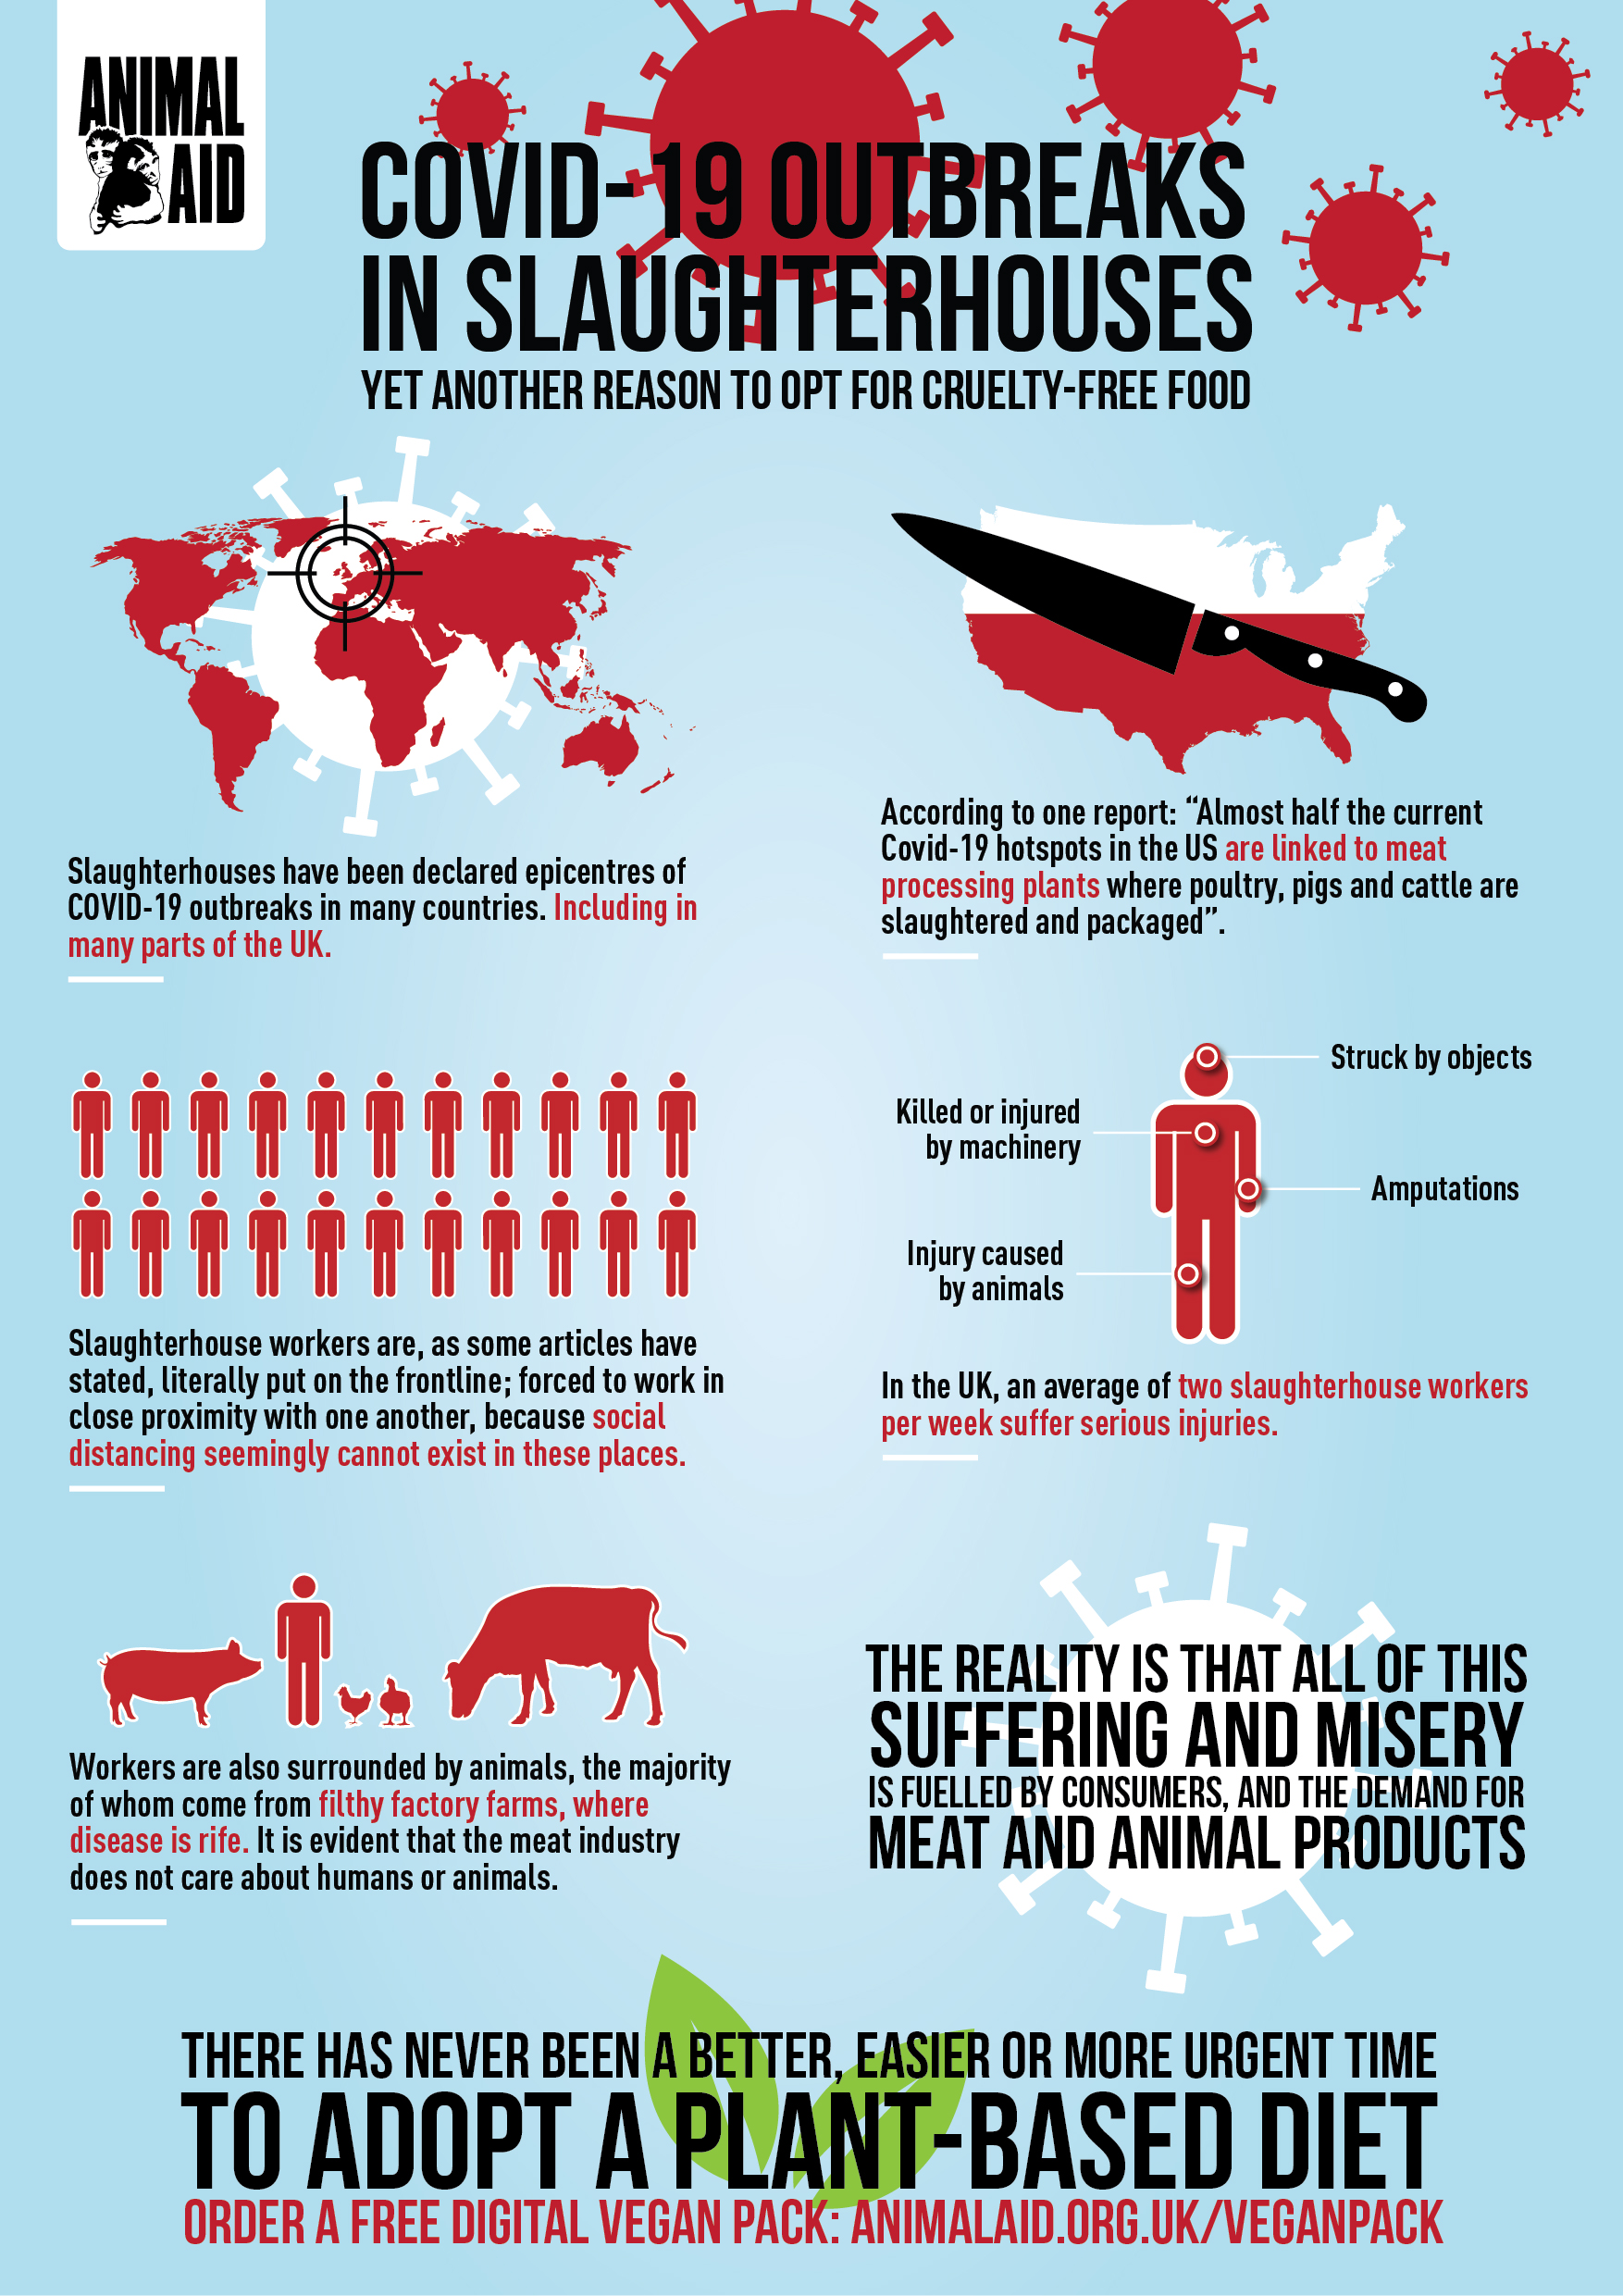 Going vegan for human rights - Animal Aid